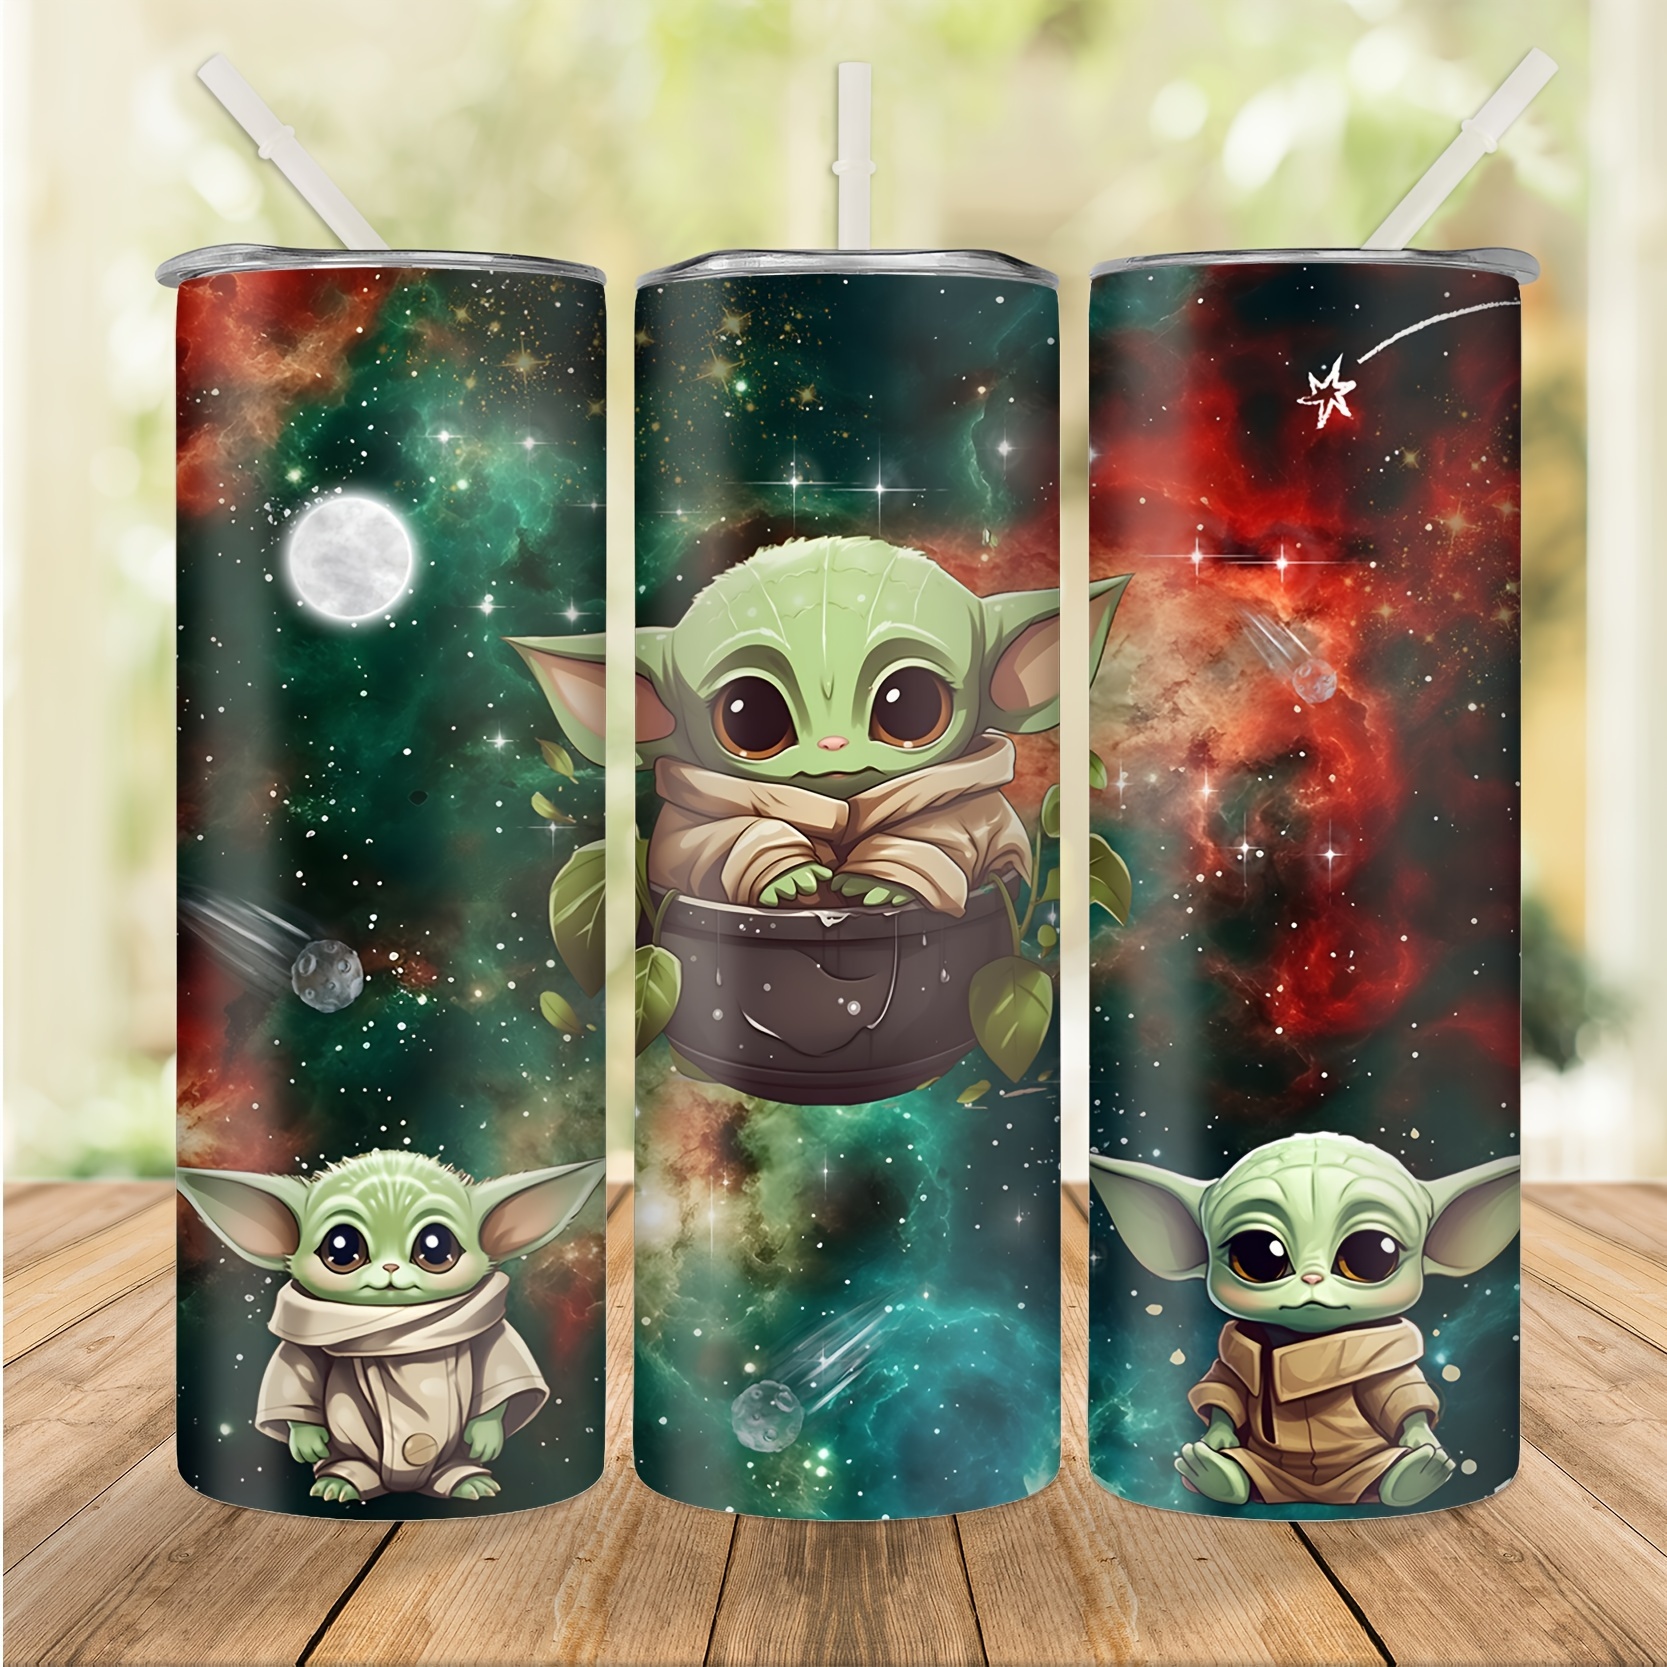 

20oz Disney Star Wars Yoda Tumbler With Straw - Stainless Steel Insulated Water Bottle, Rust-proof & Detachable Lid, Perfect Gift For Family And Friends